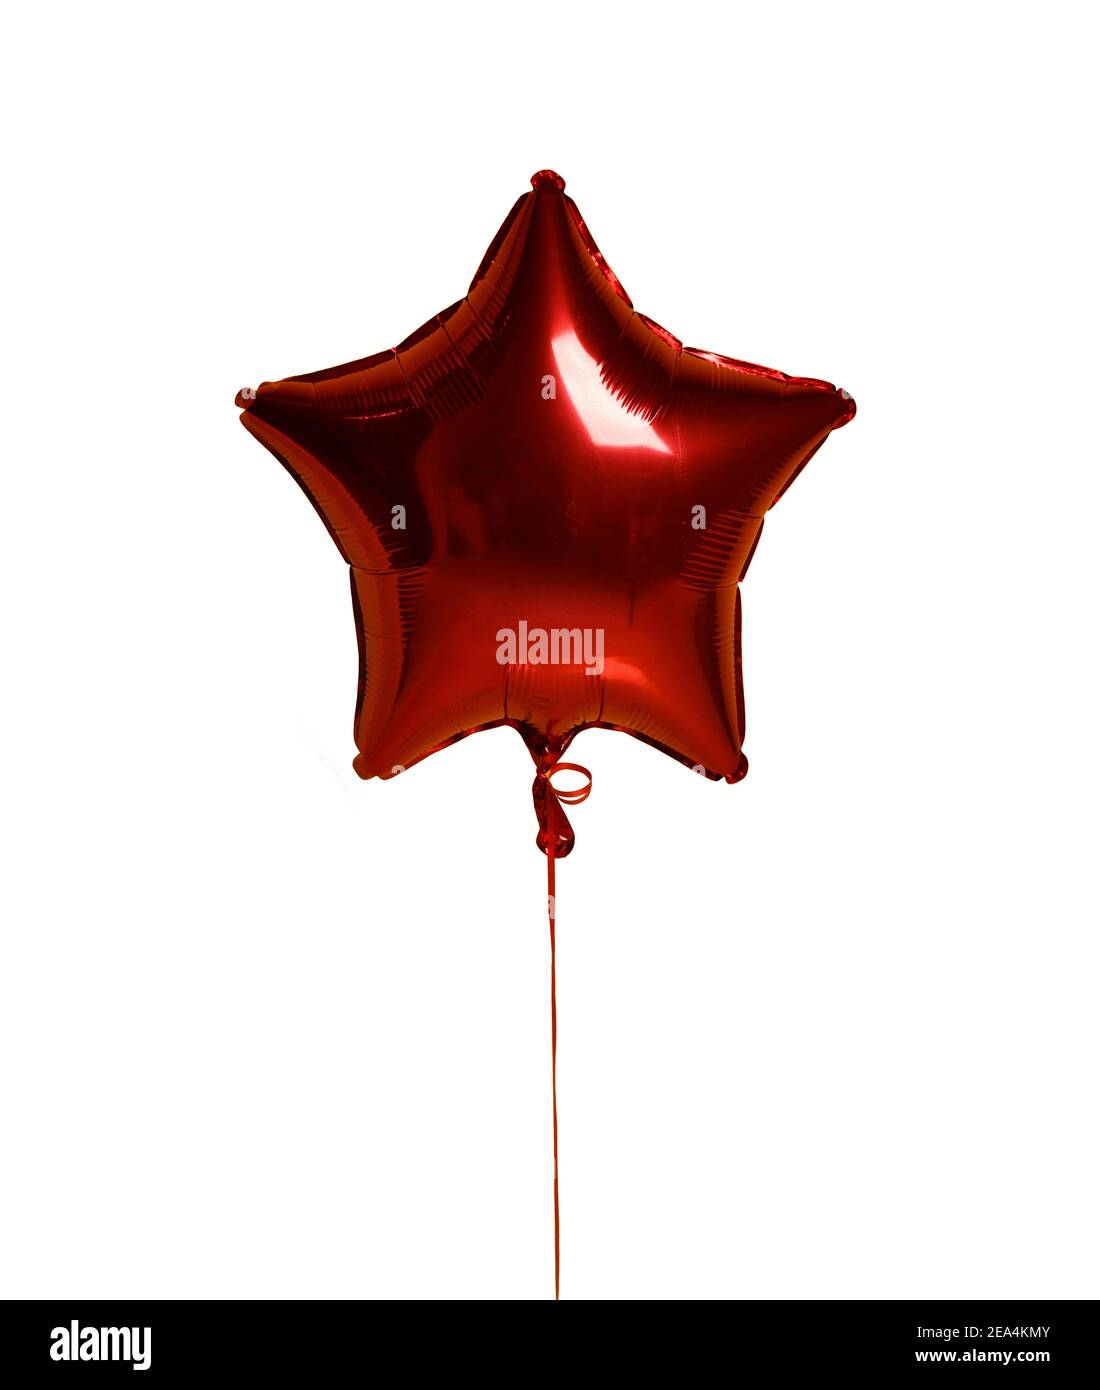 Single big red star metallic balloon ballon object for birthday party isolated on a white  Stock Photo